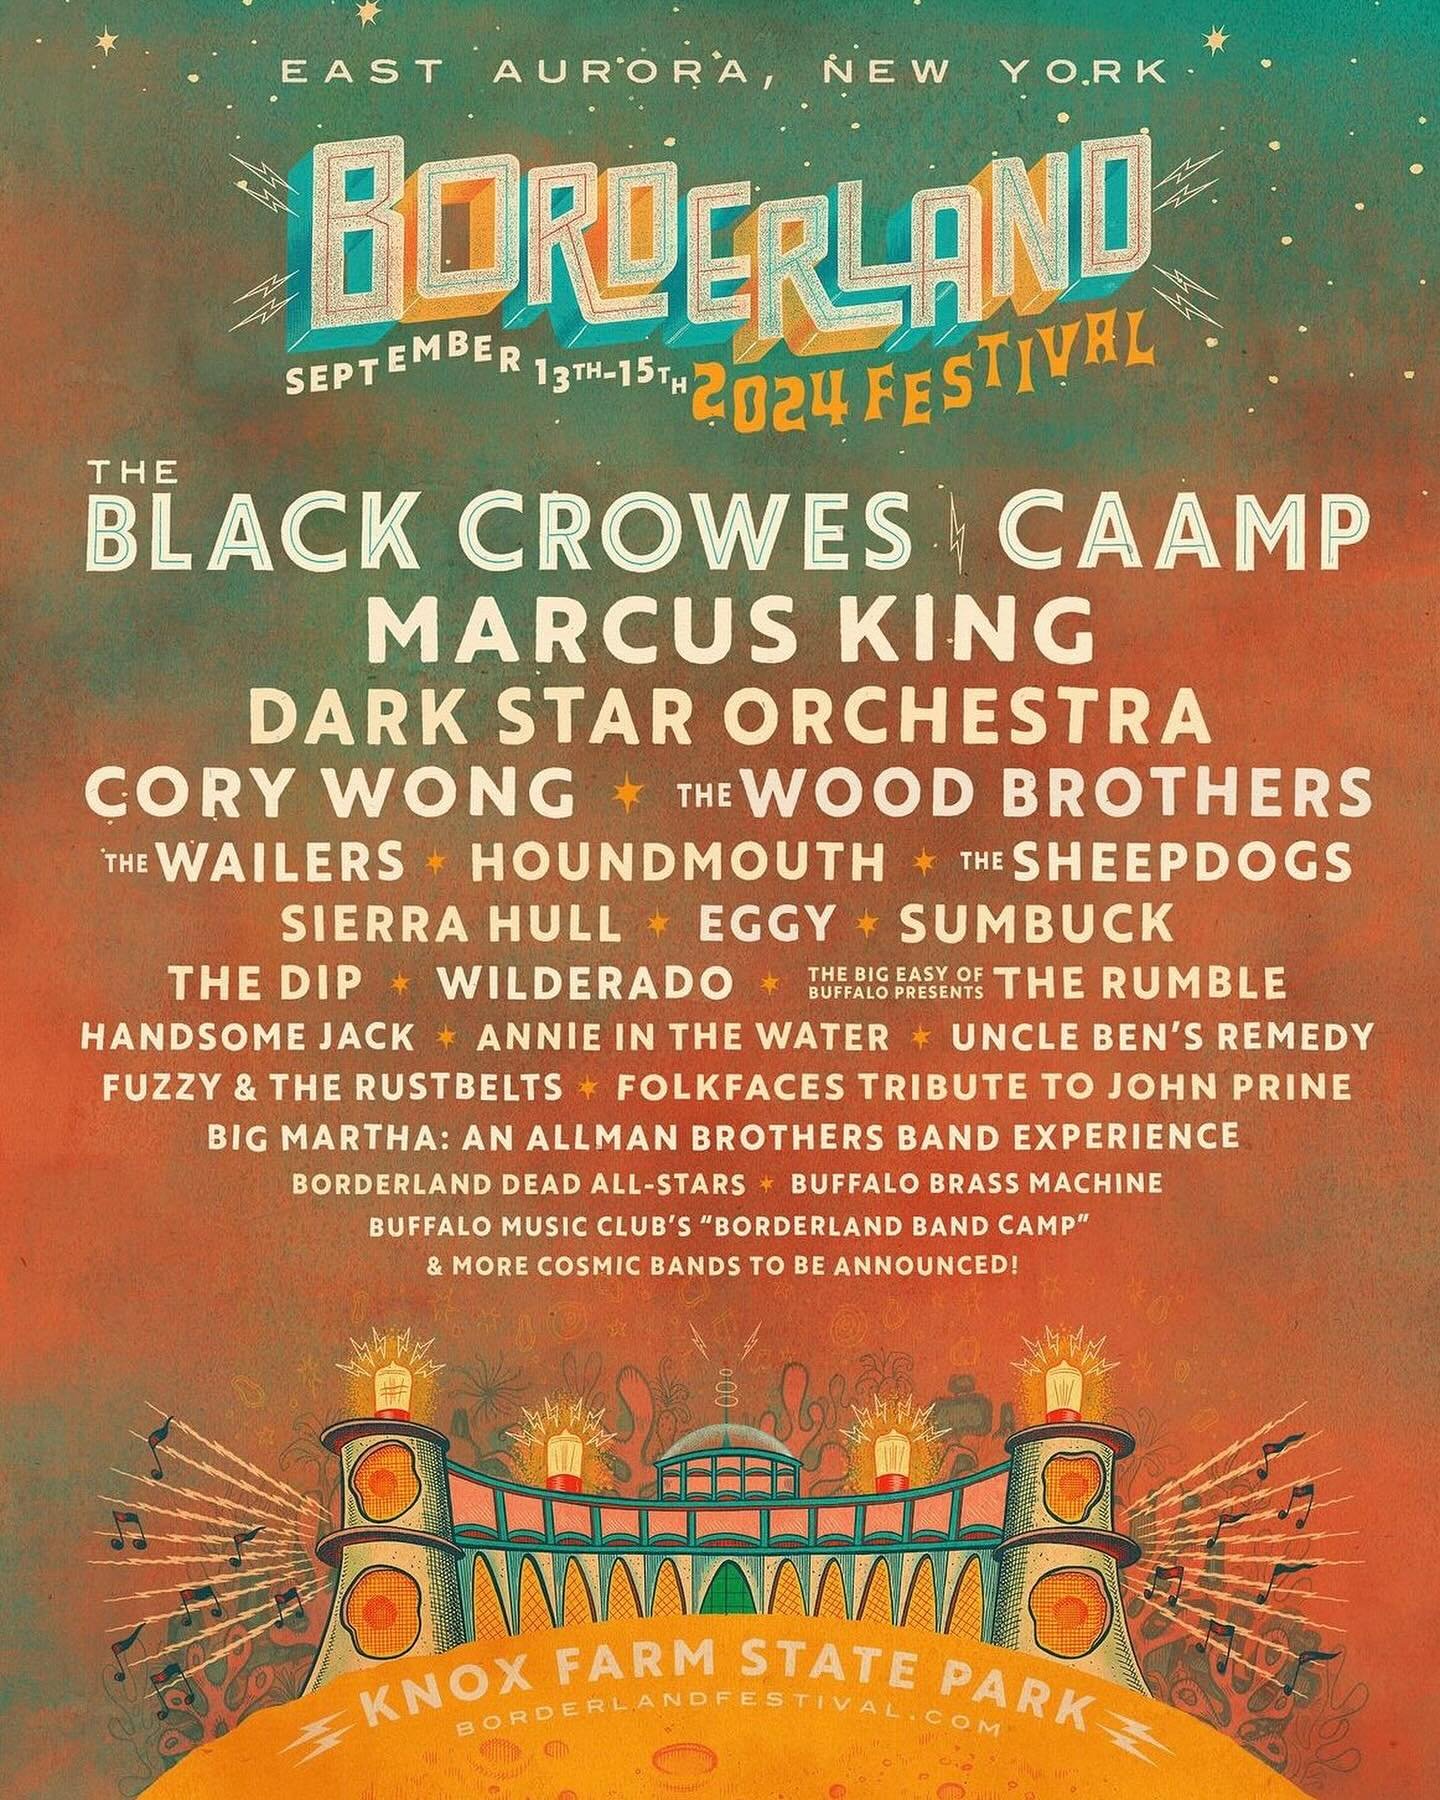 Excited to play @borderlandfestival this September! Passes on sale NOW at the link in bio 🌟